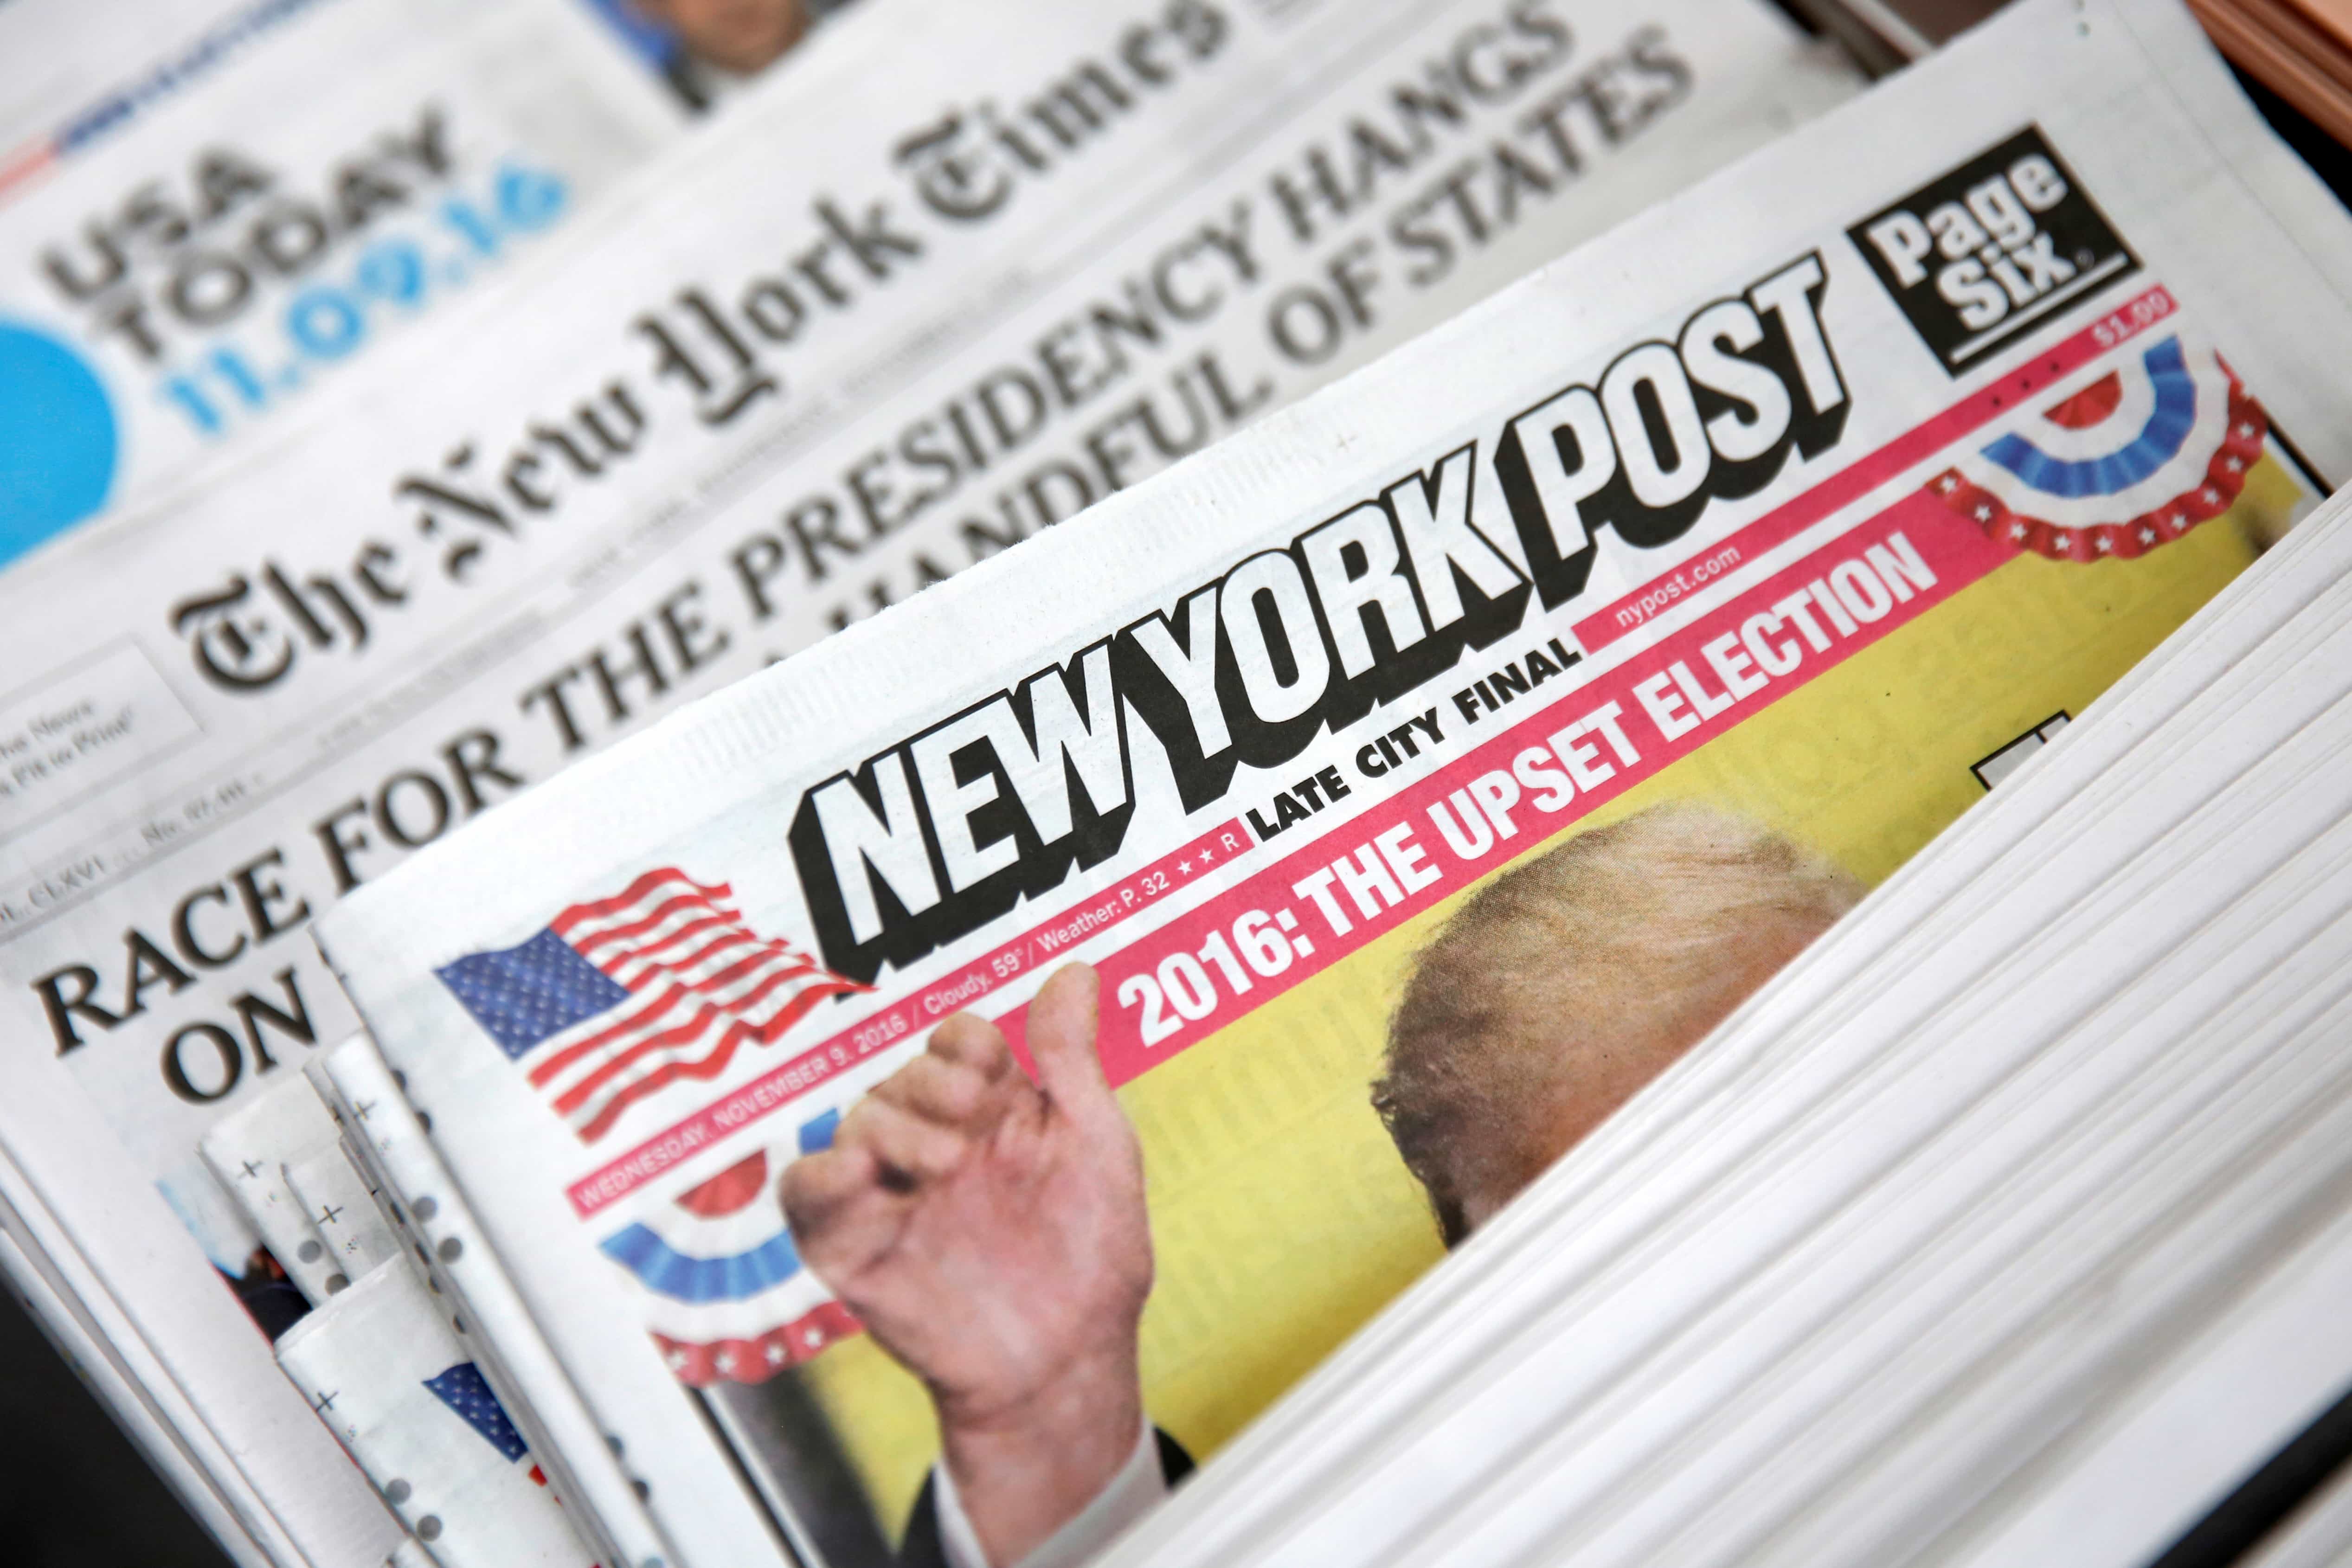 The cover of the New York Post newspaper is seen with other papers at a newsstand in New York U.S., 9 November 2016, REUTERS/Shannon Stapleton